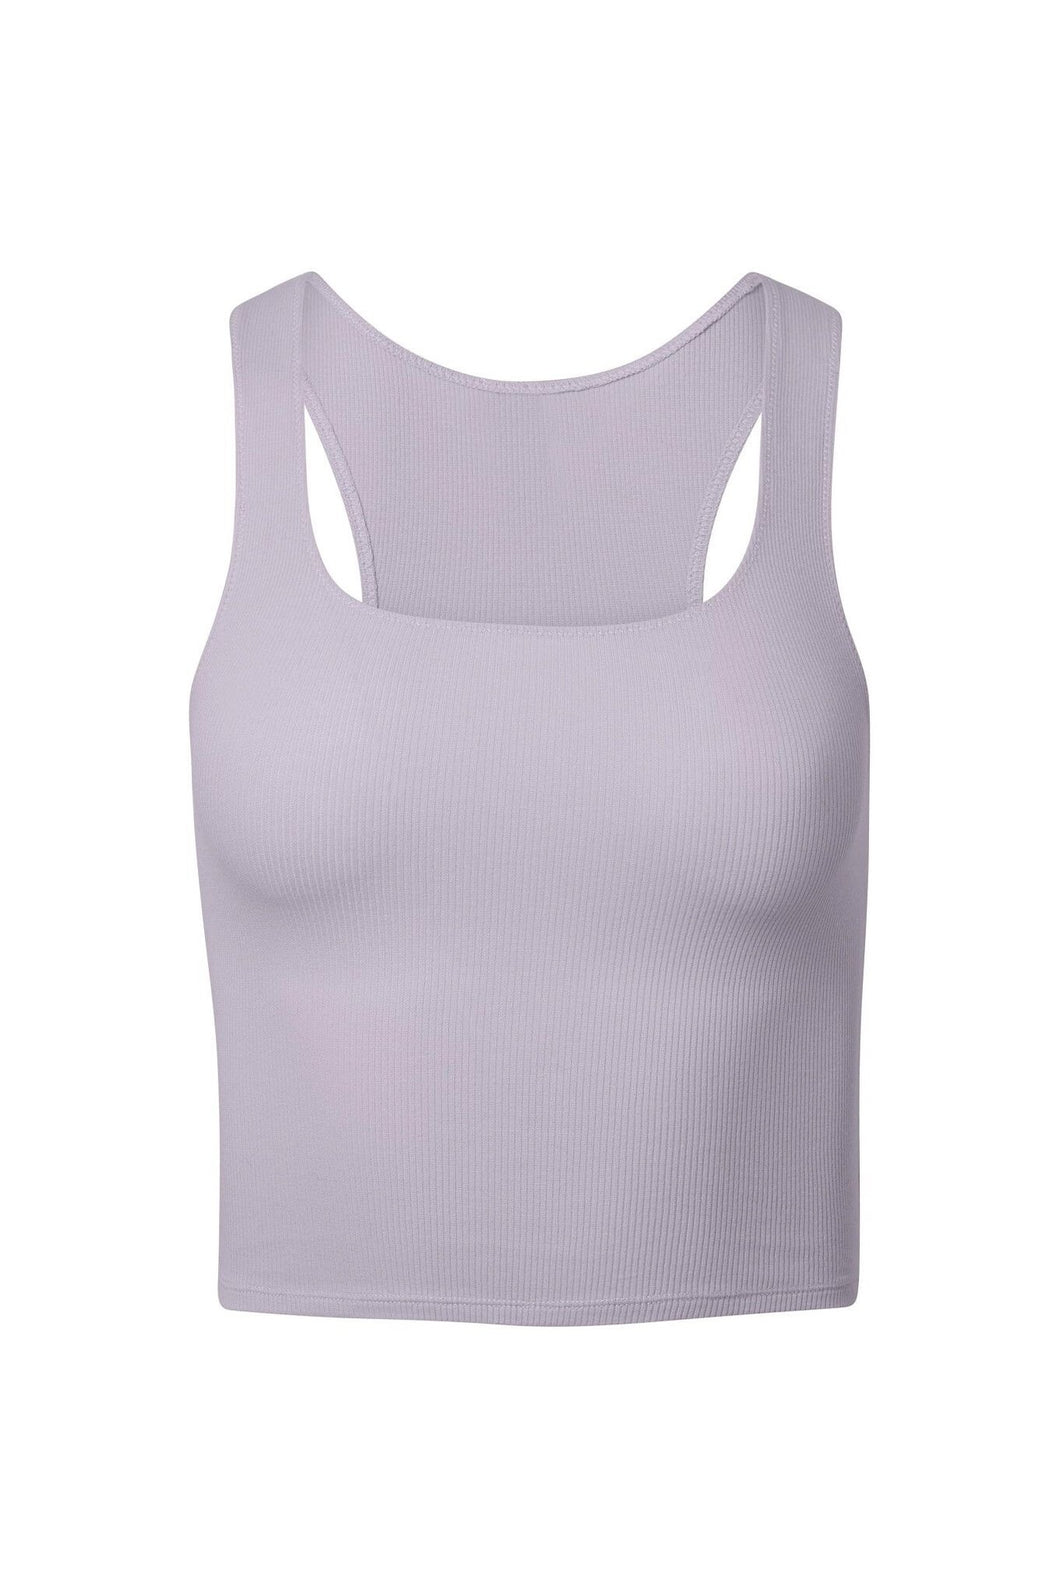 nueskin Jody in color Orchid Hush and shape tank